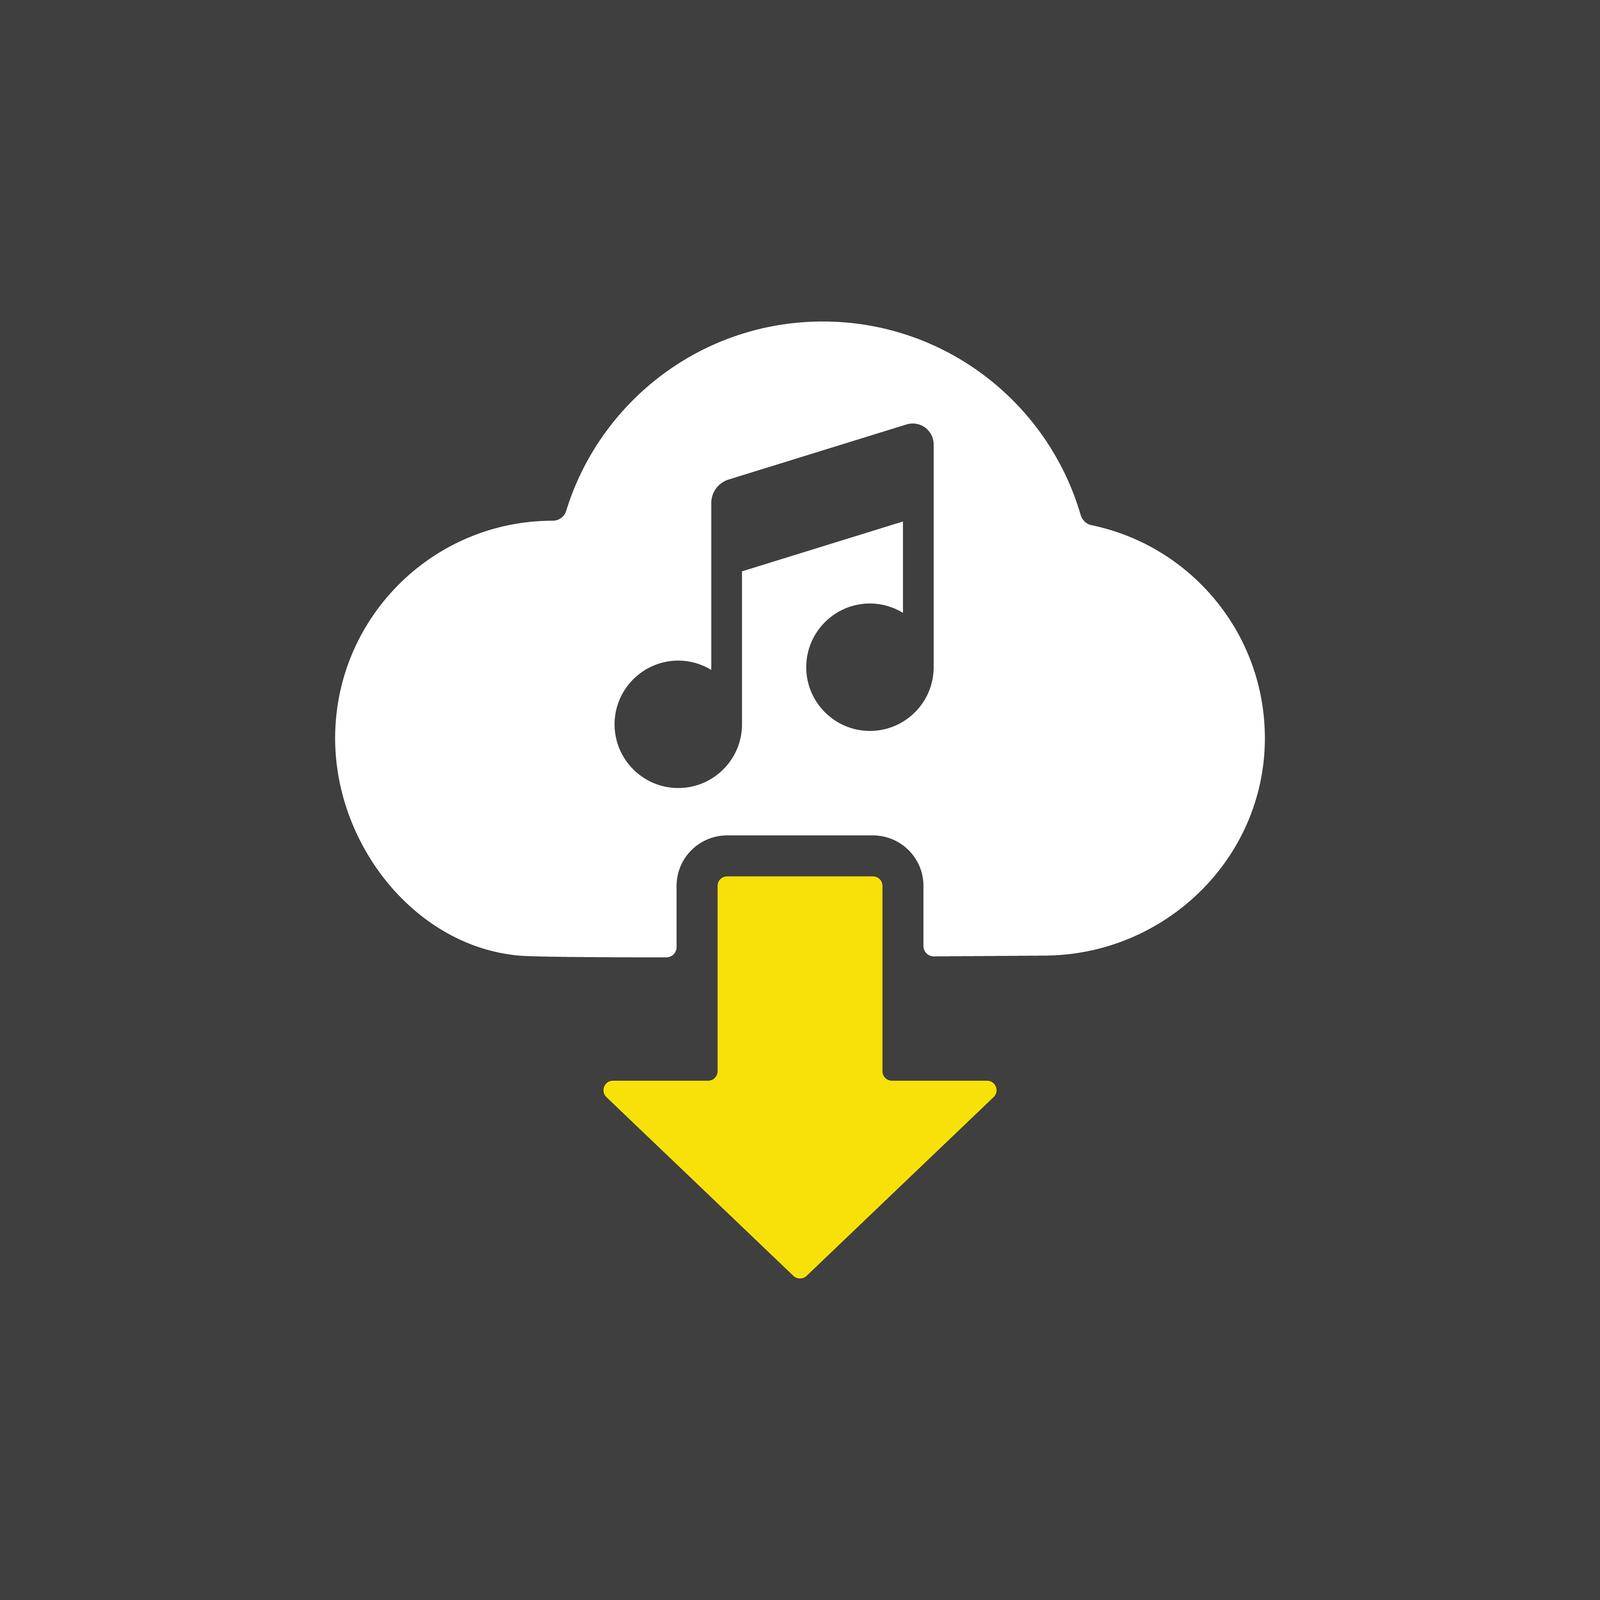 Cloud download music glyph icon vector icon on dark background. Music sign. Graph symbol for music and sound web site and apps design, logo, app, UI